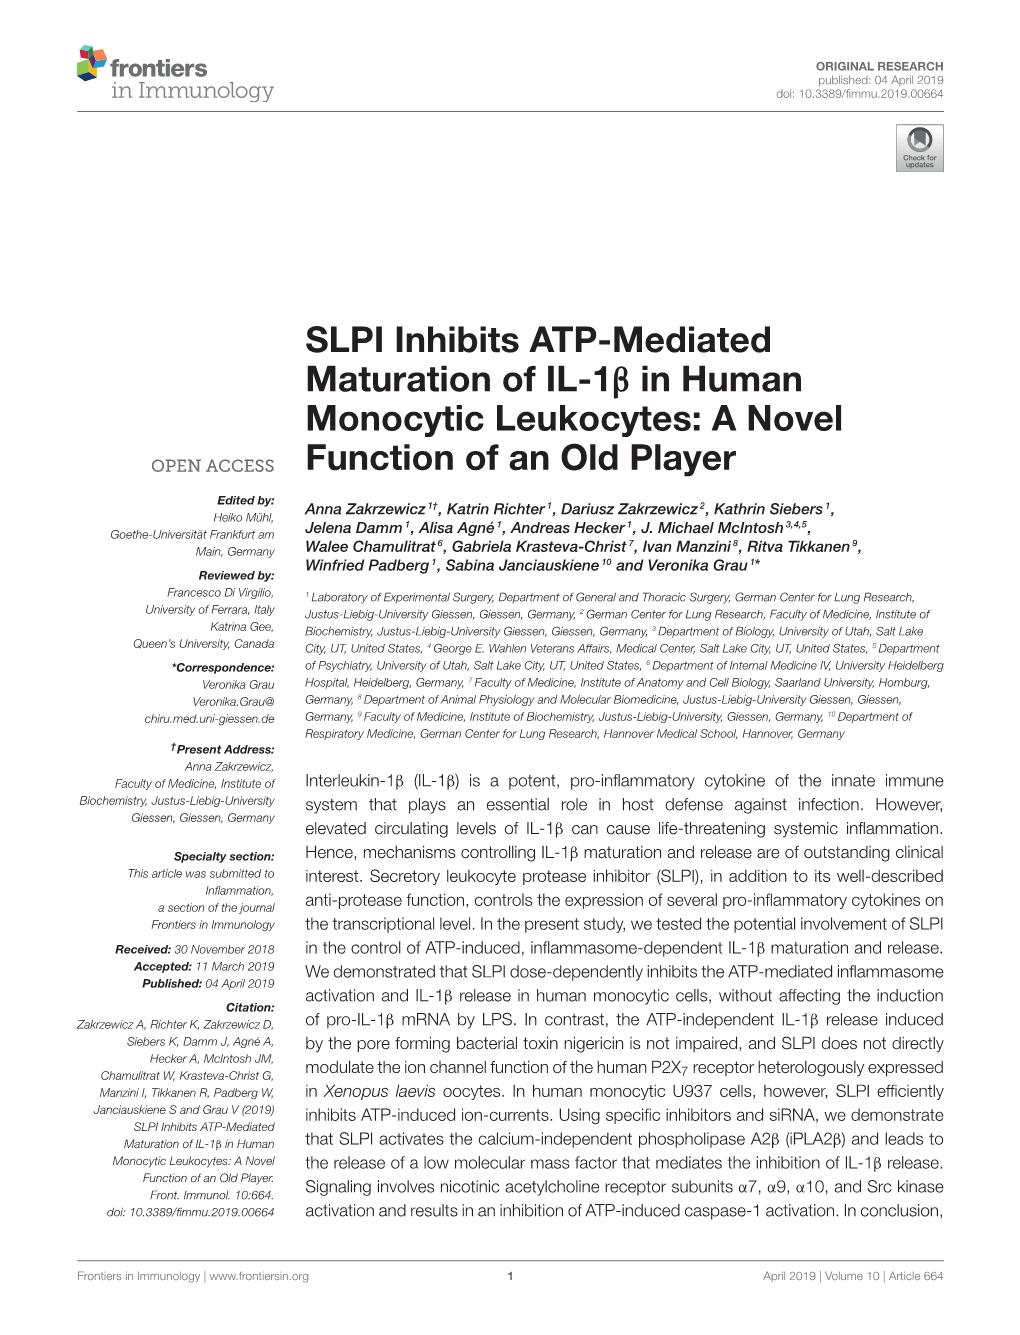 SLPI Inhibits ATP-Mediated Maturation of IL-1Β in Human Monocytic Leukocytes: a Novel Function of an Old Player